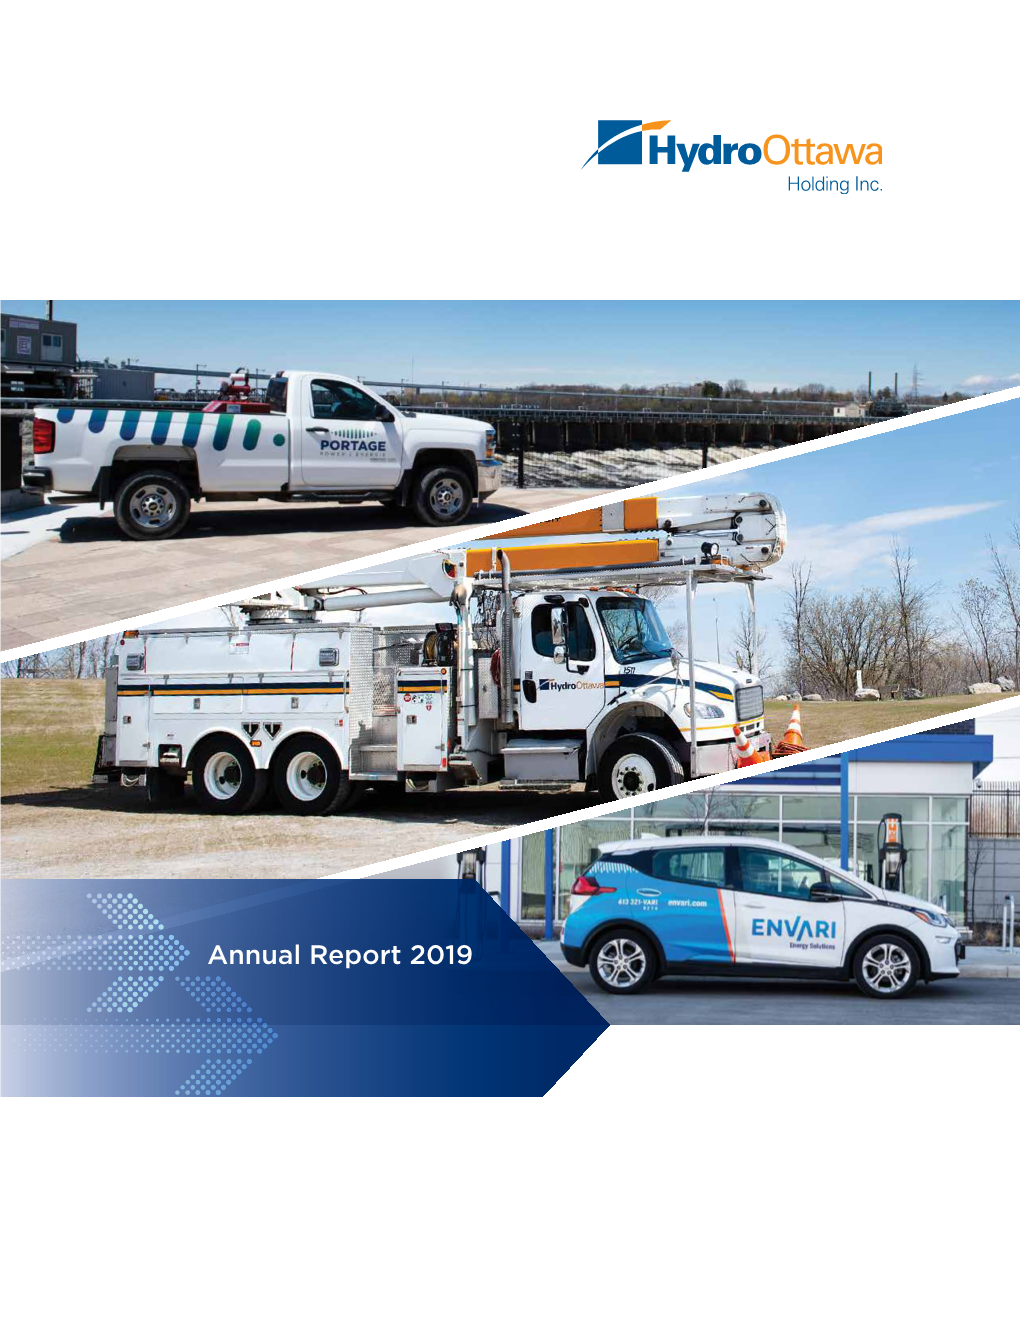 2019 Annual Report to Our Shareholder, the City of Ottawa